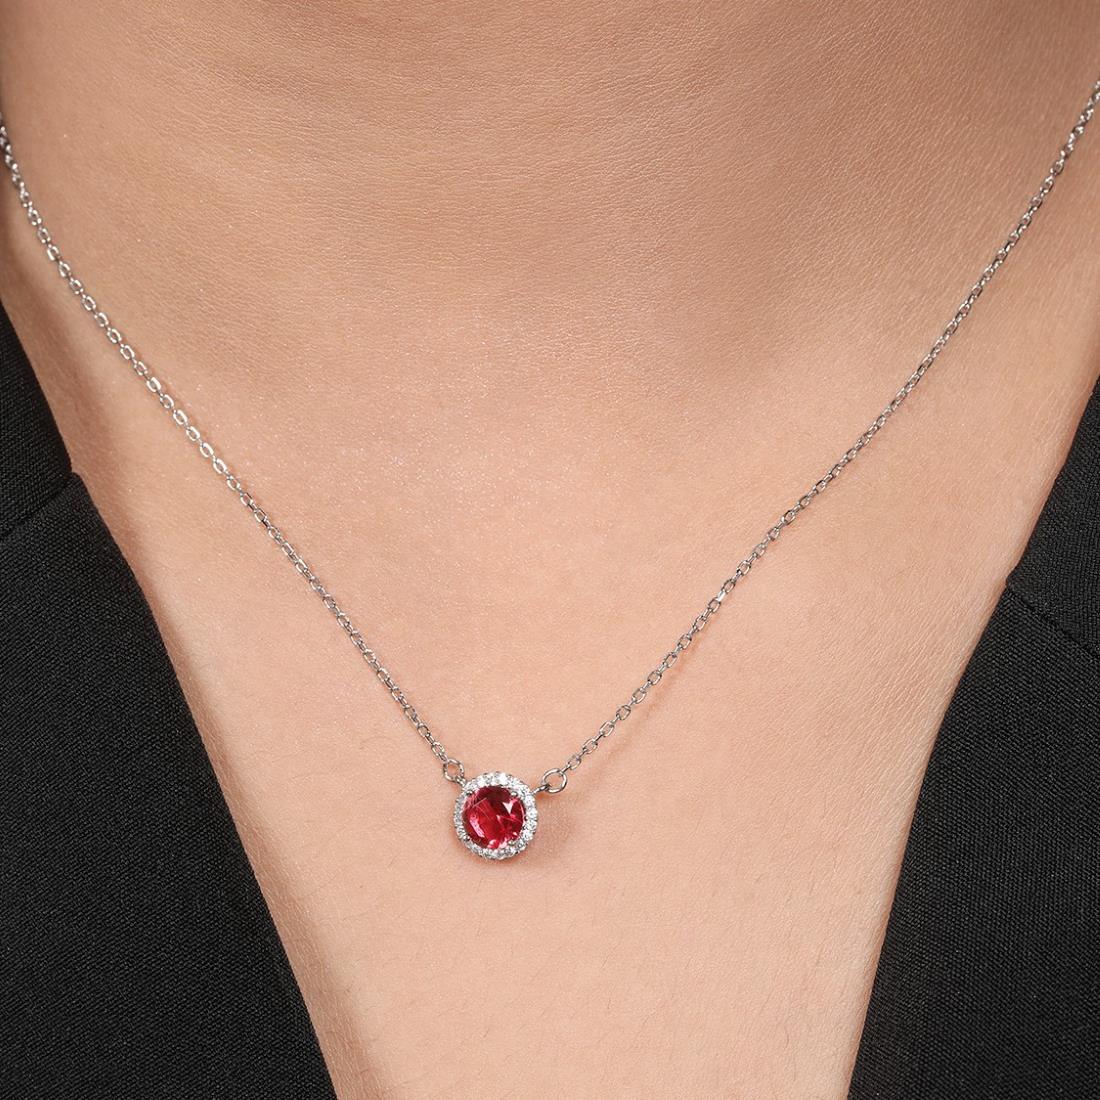 Radiant Circles Rhodium Plated 925 Sterling Silver Necklace